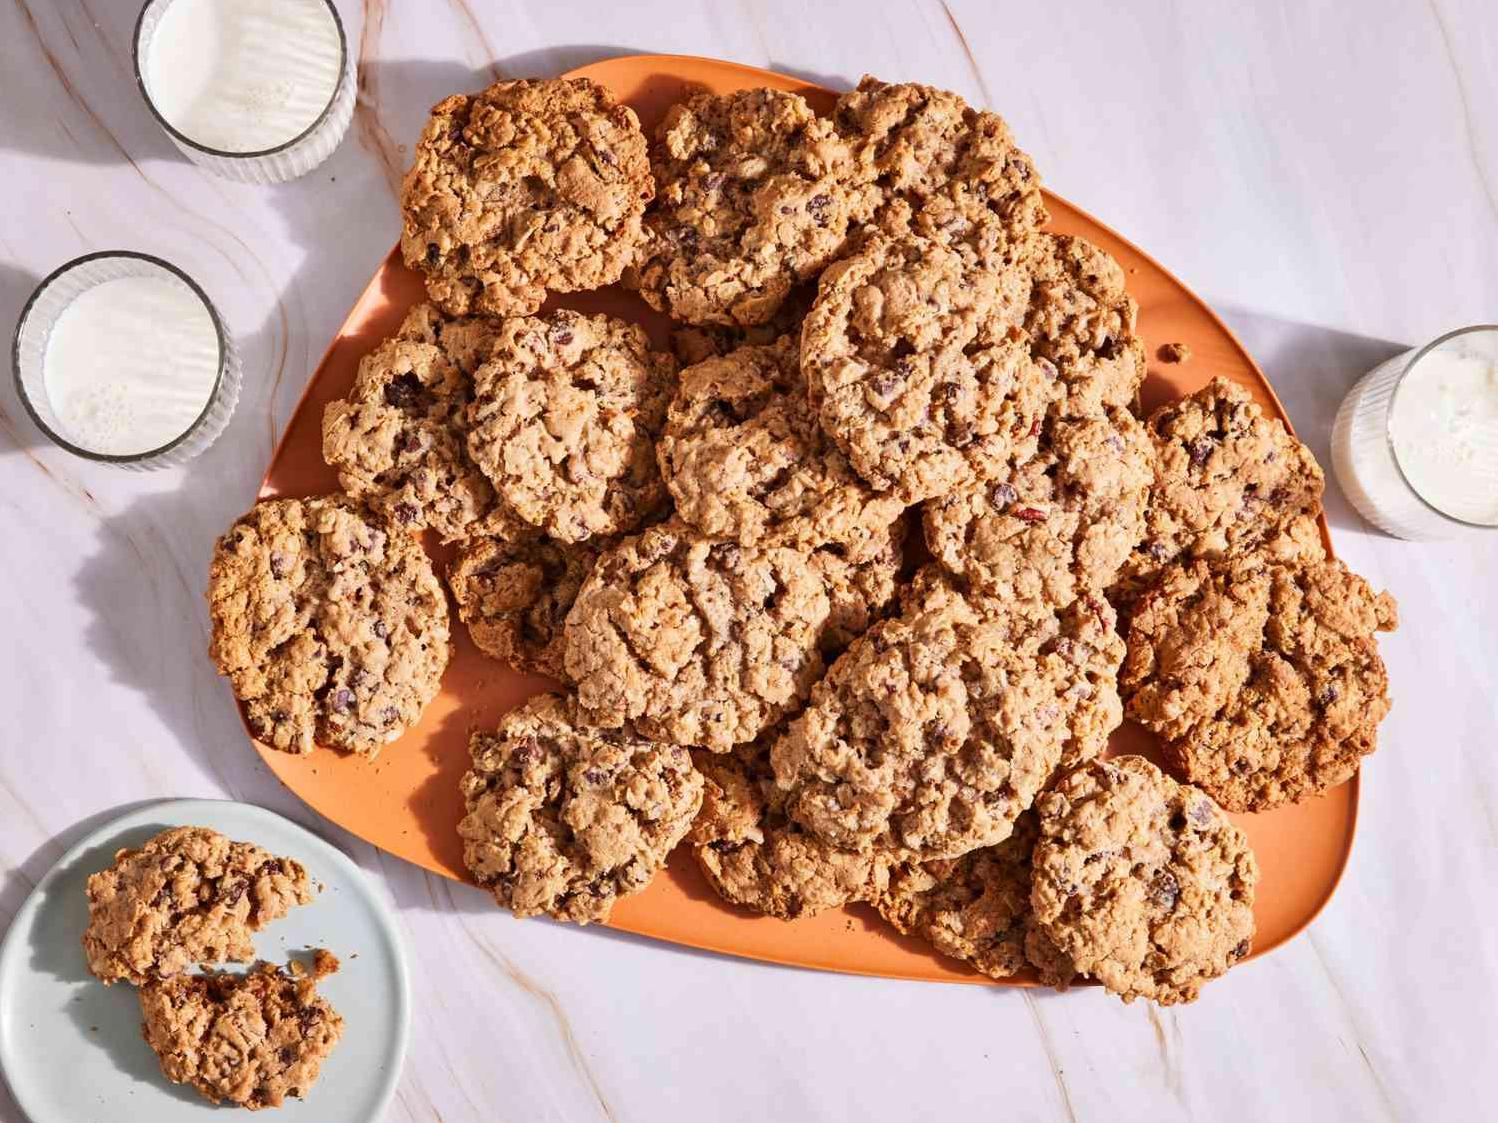  These cookies are wrangled and chewy, just like a true cowboy.